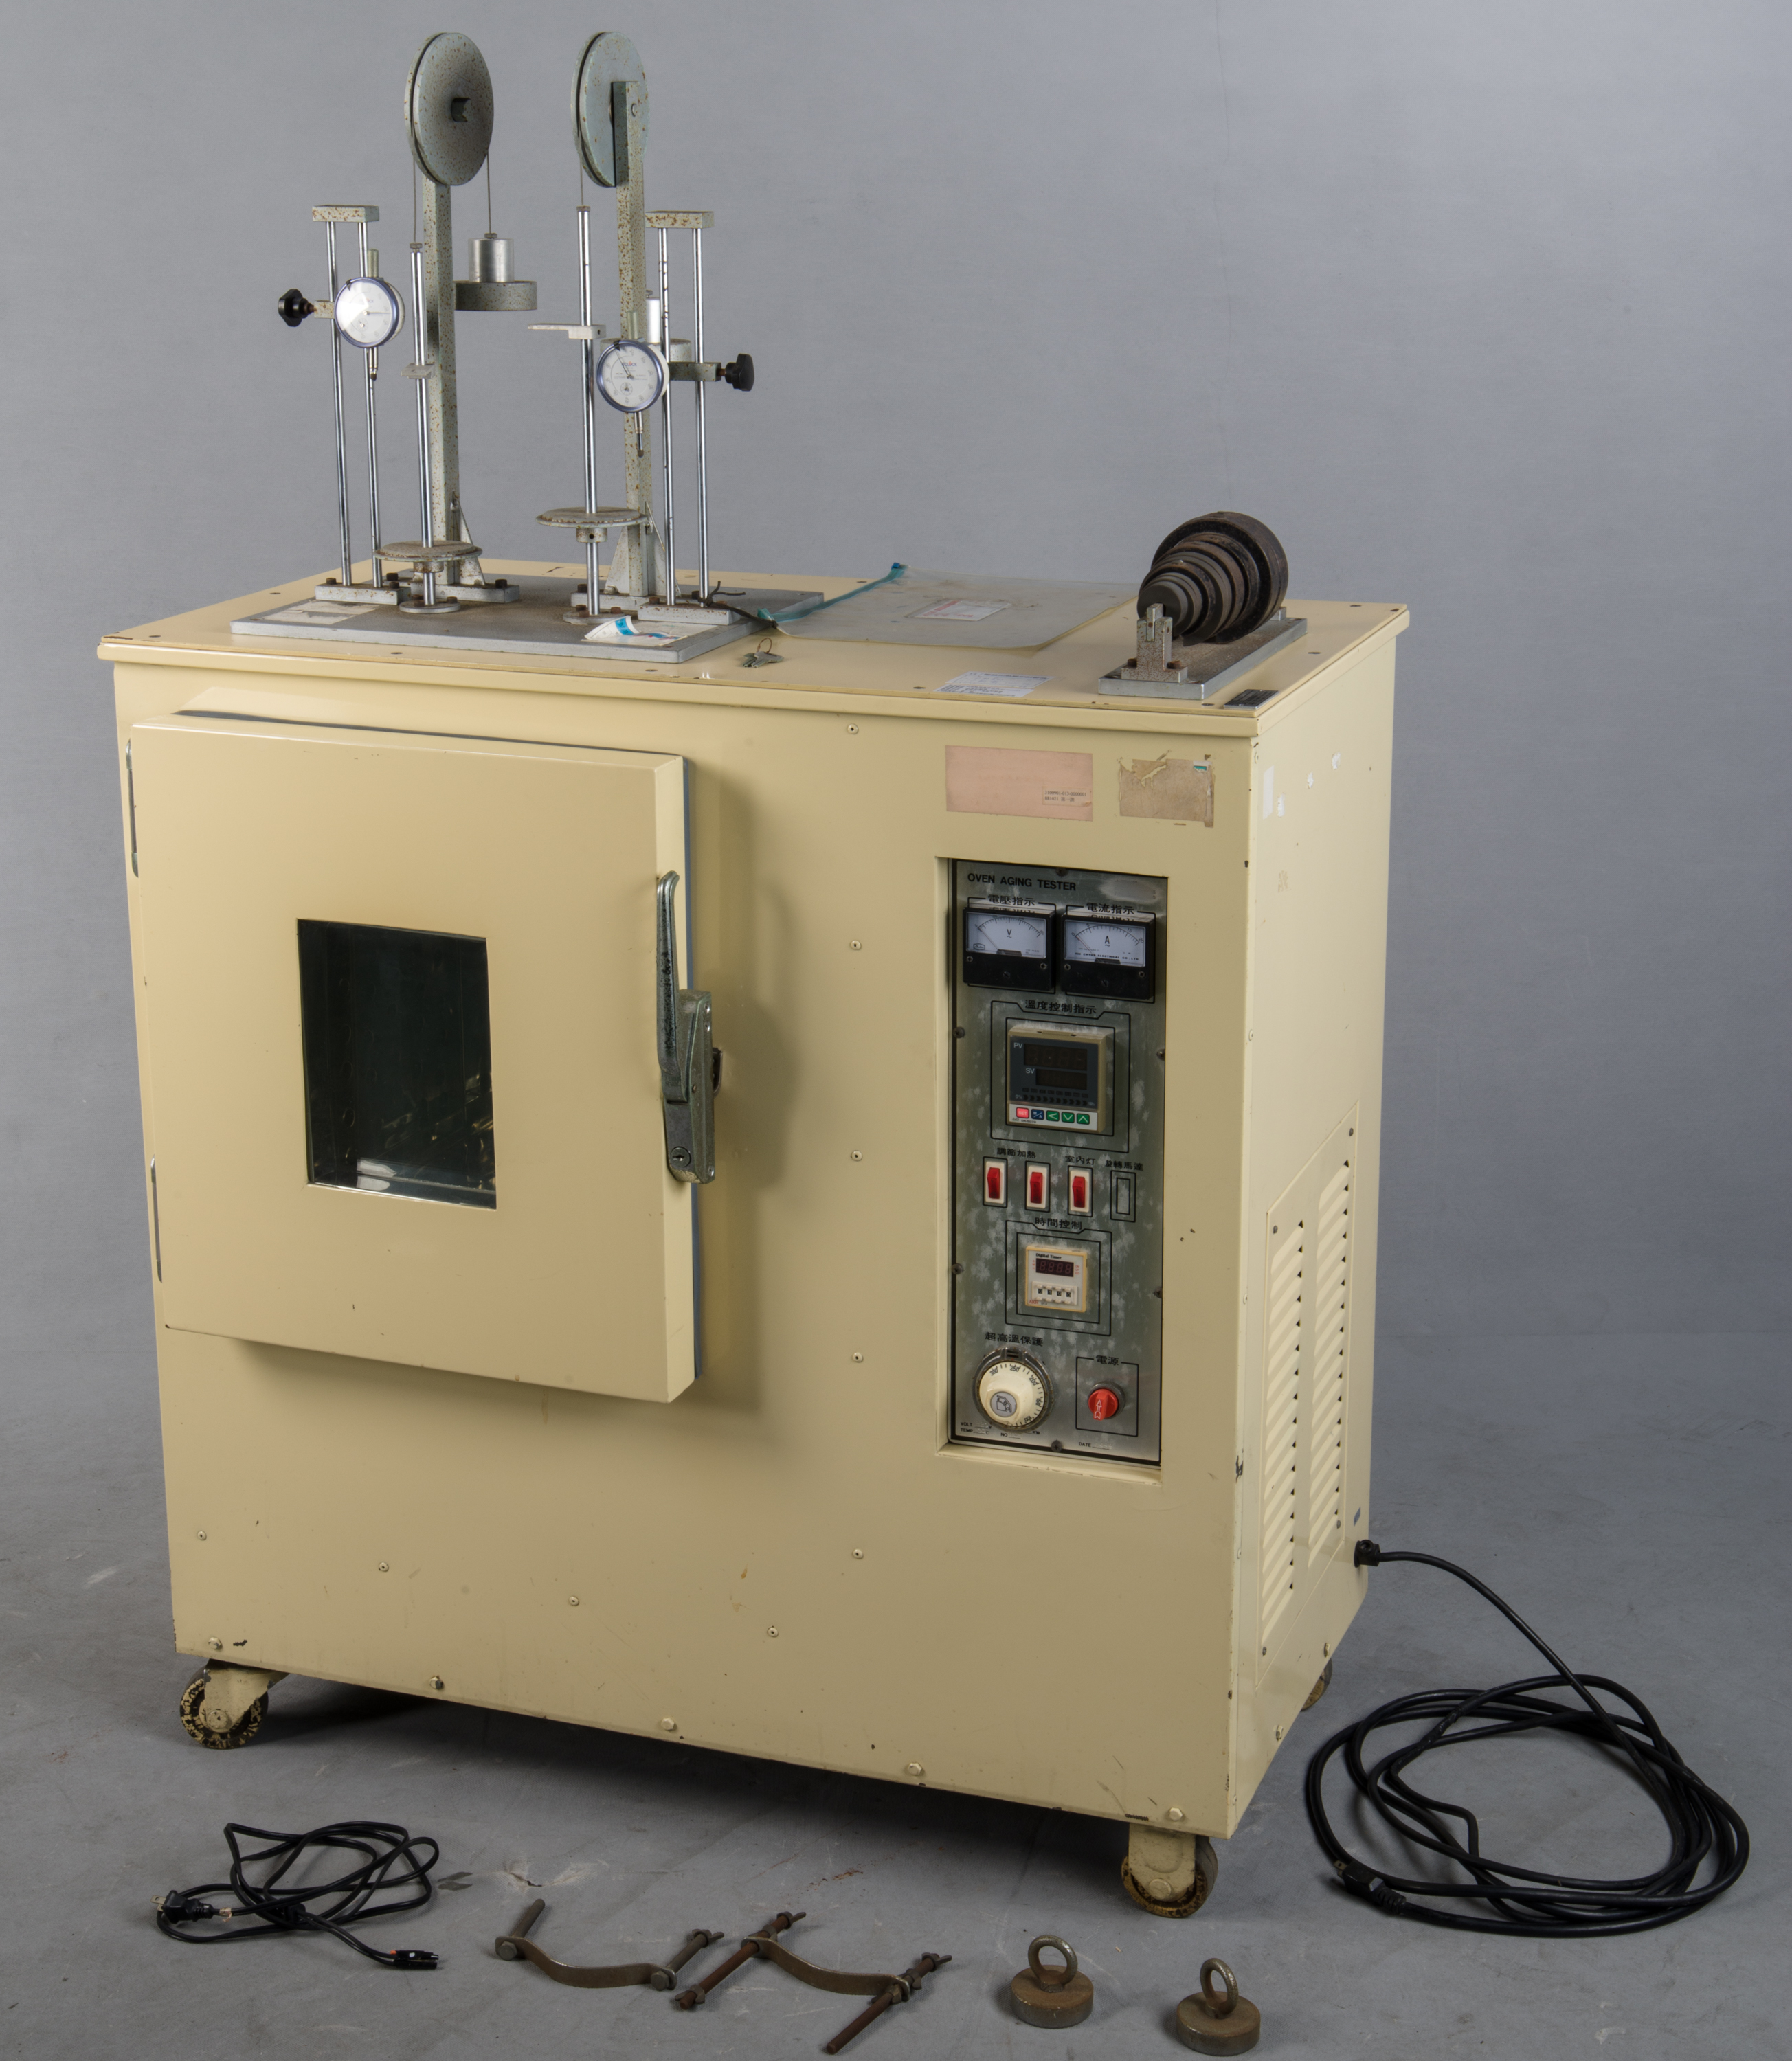 The wires heat distortion testing machine,Total 2 pictures